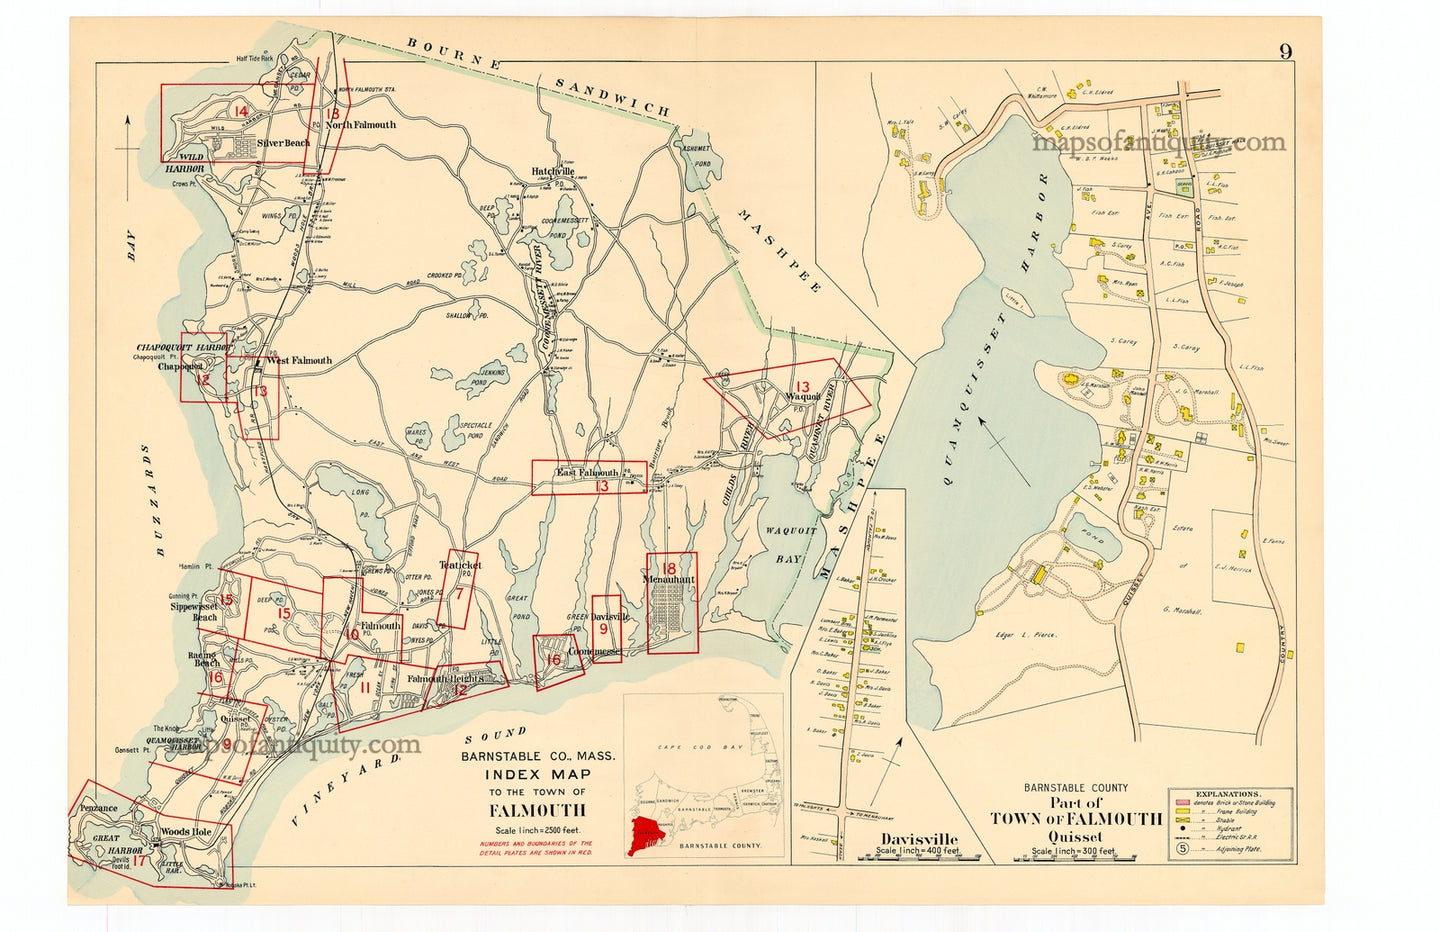 Reproduction-Map-Walker-1906.-Index-Map-Town-of-Falmouth-Quisset-Davisville